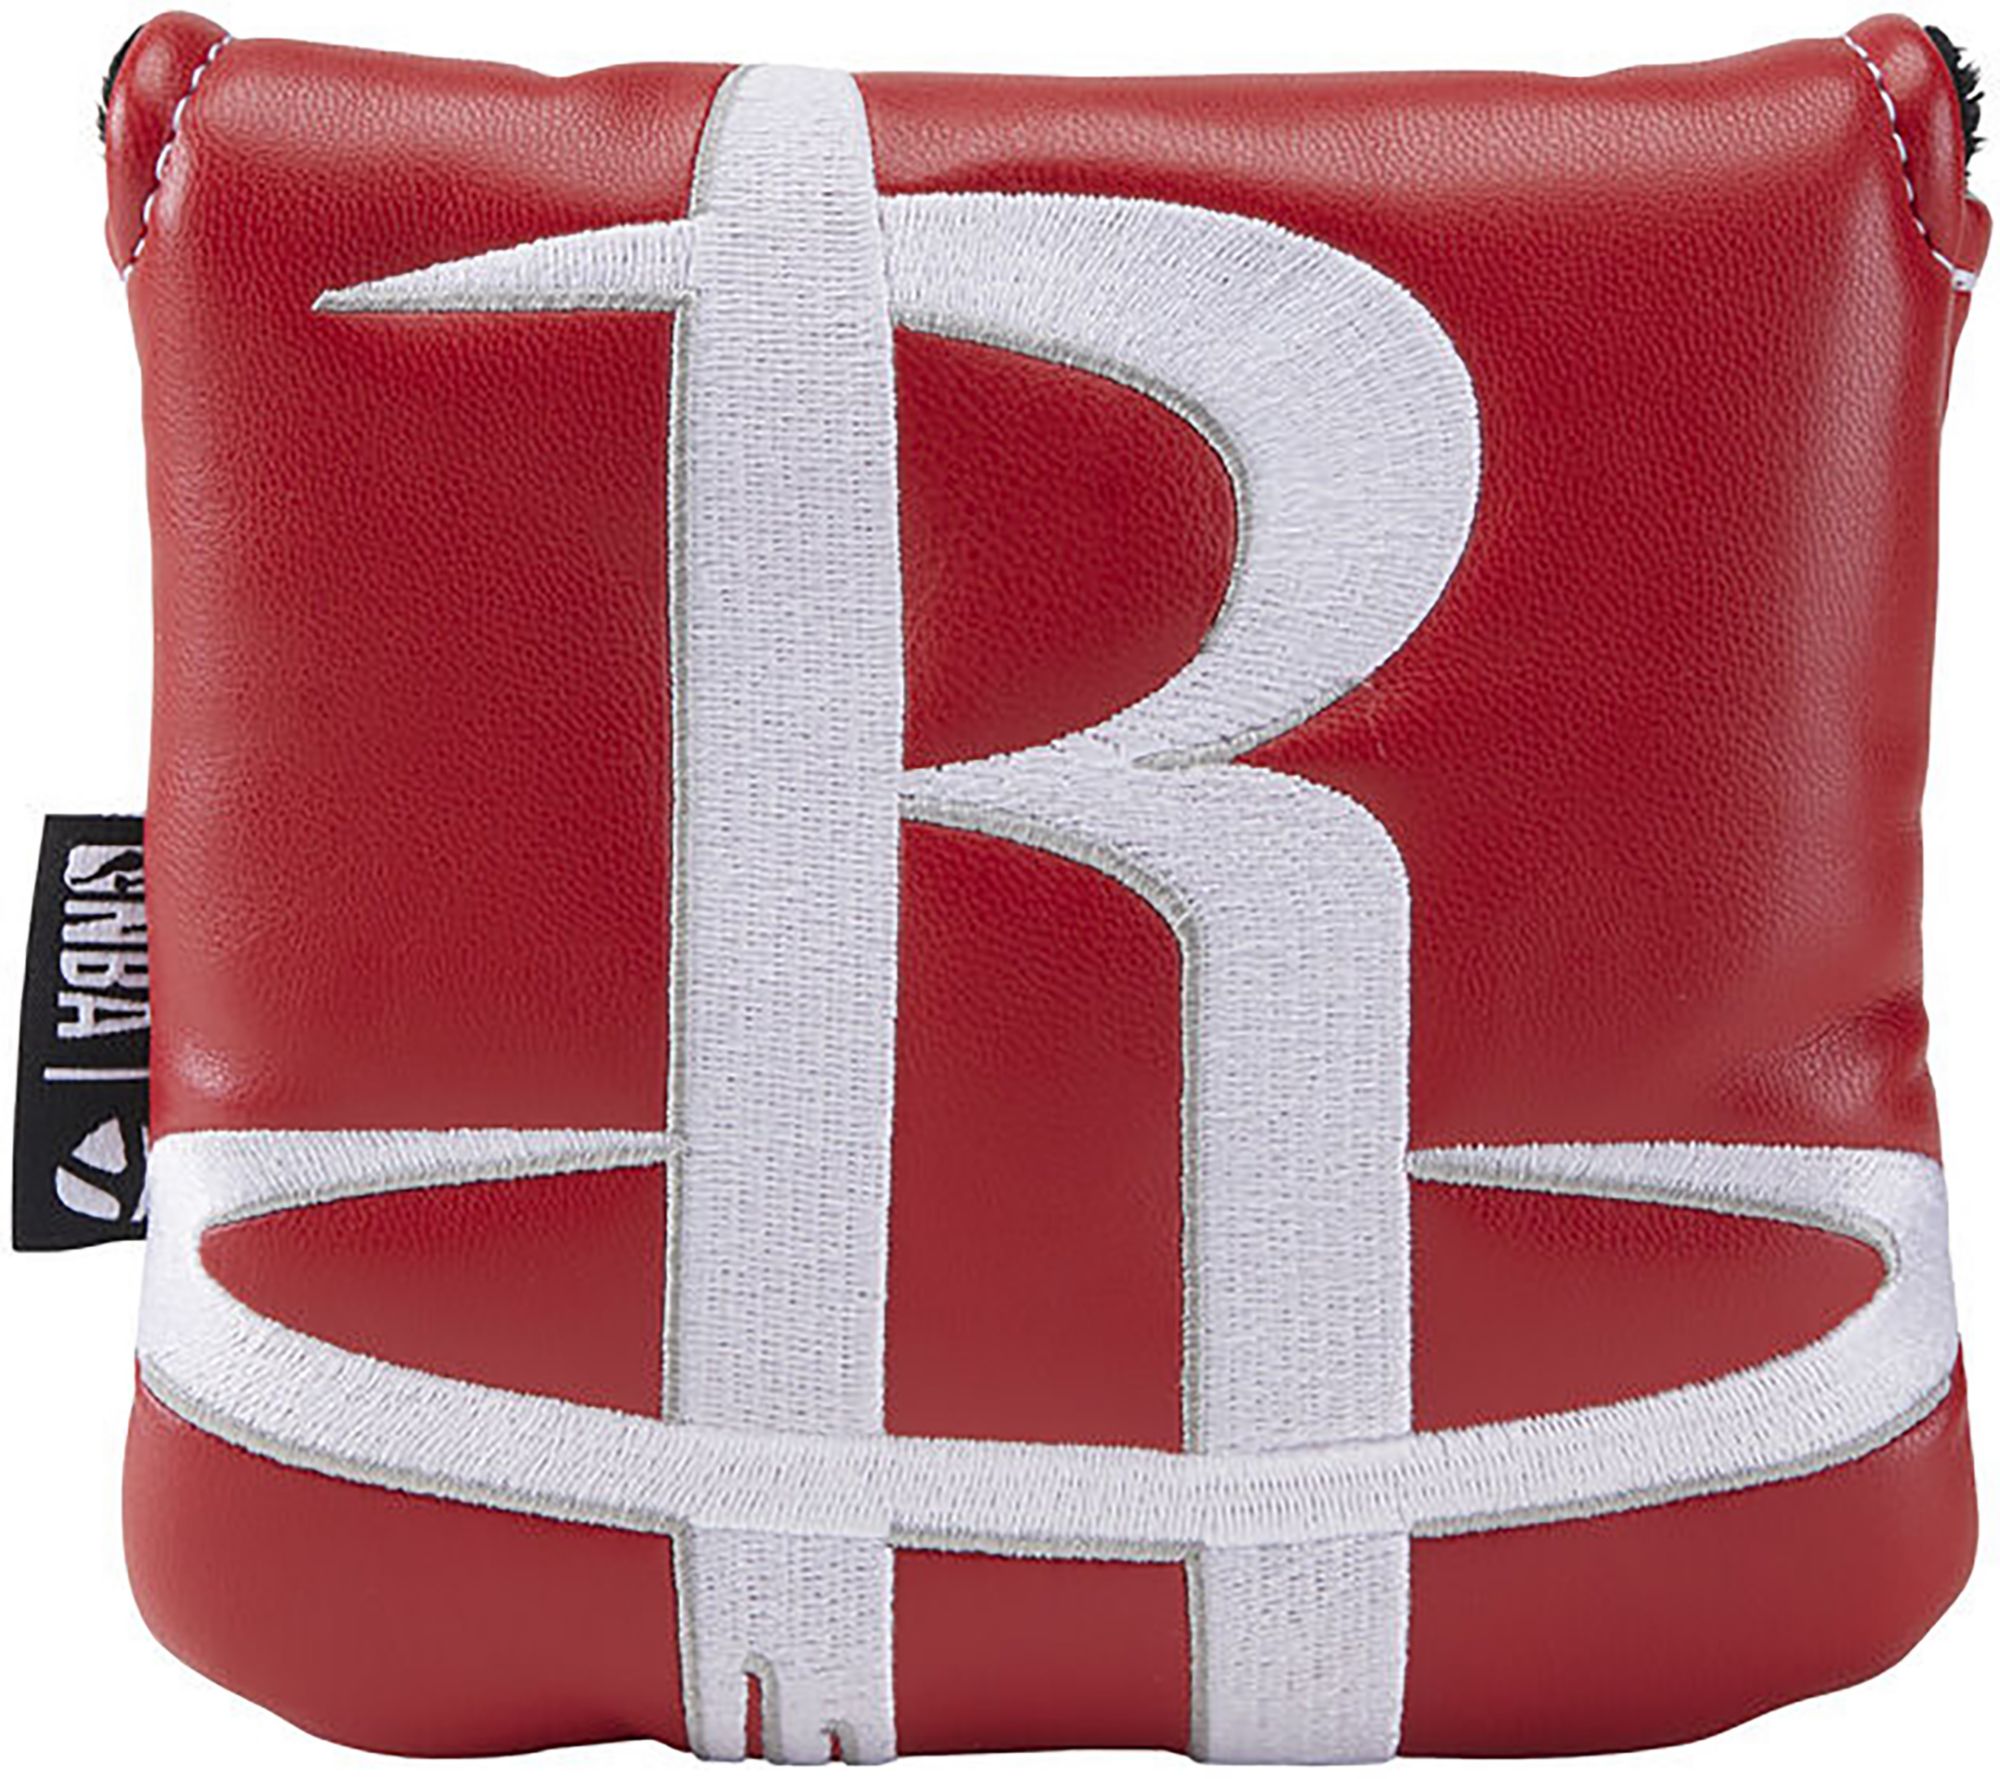 TaylorMade Houston Rockets Mallet Putter Headcover